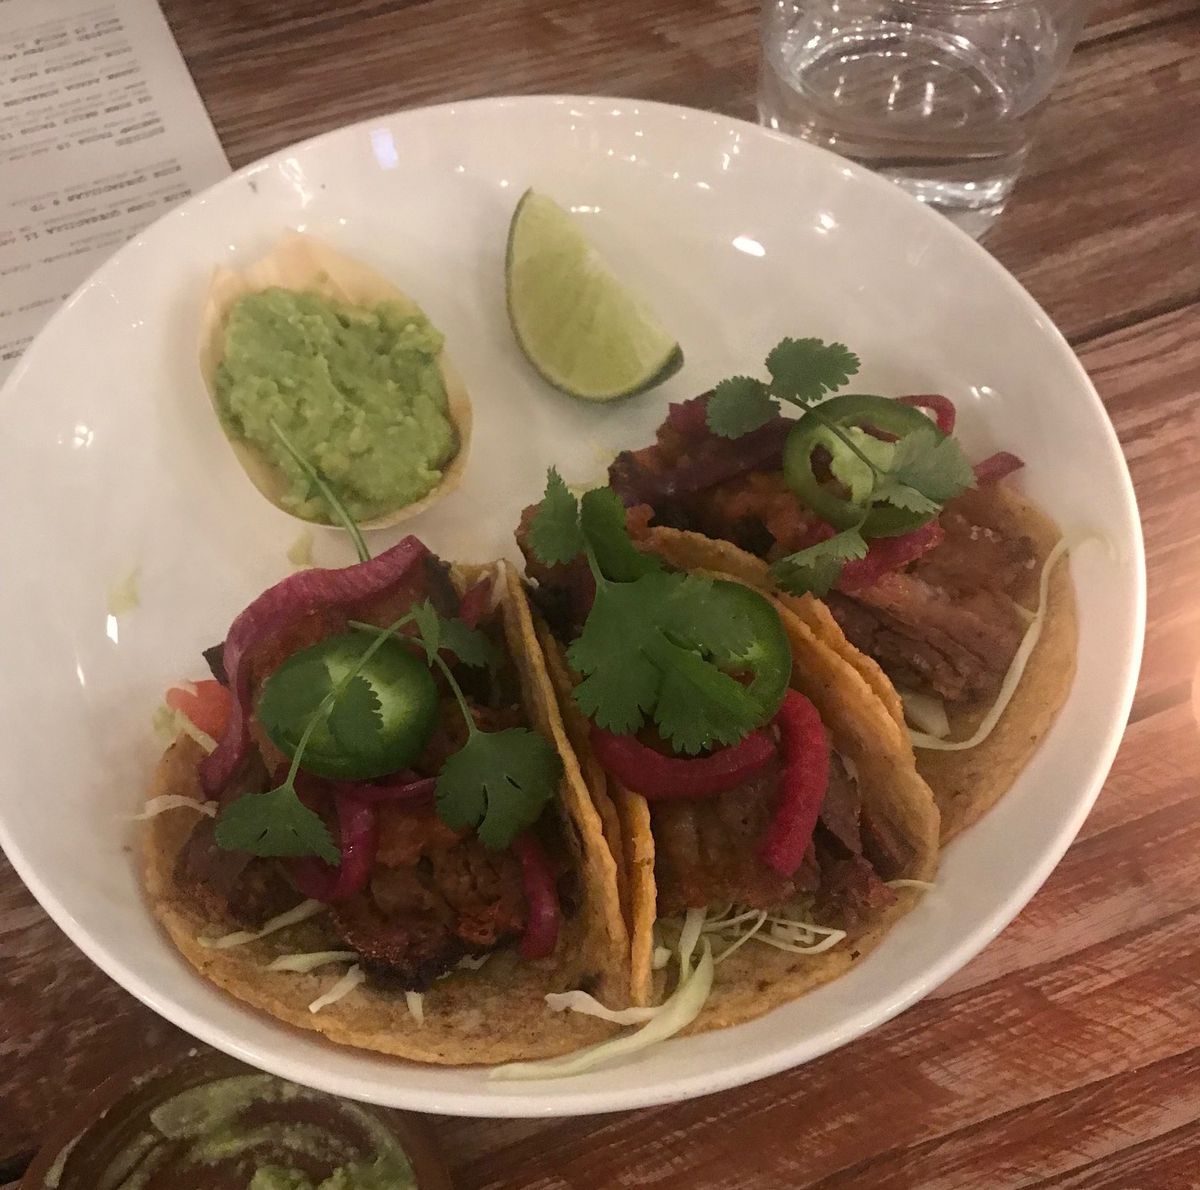 A trio of tacos in a white bowl.